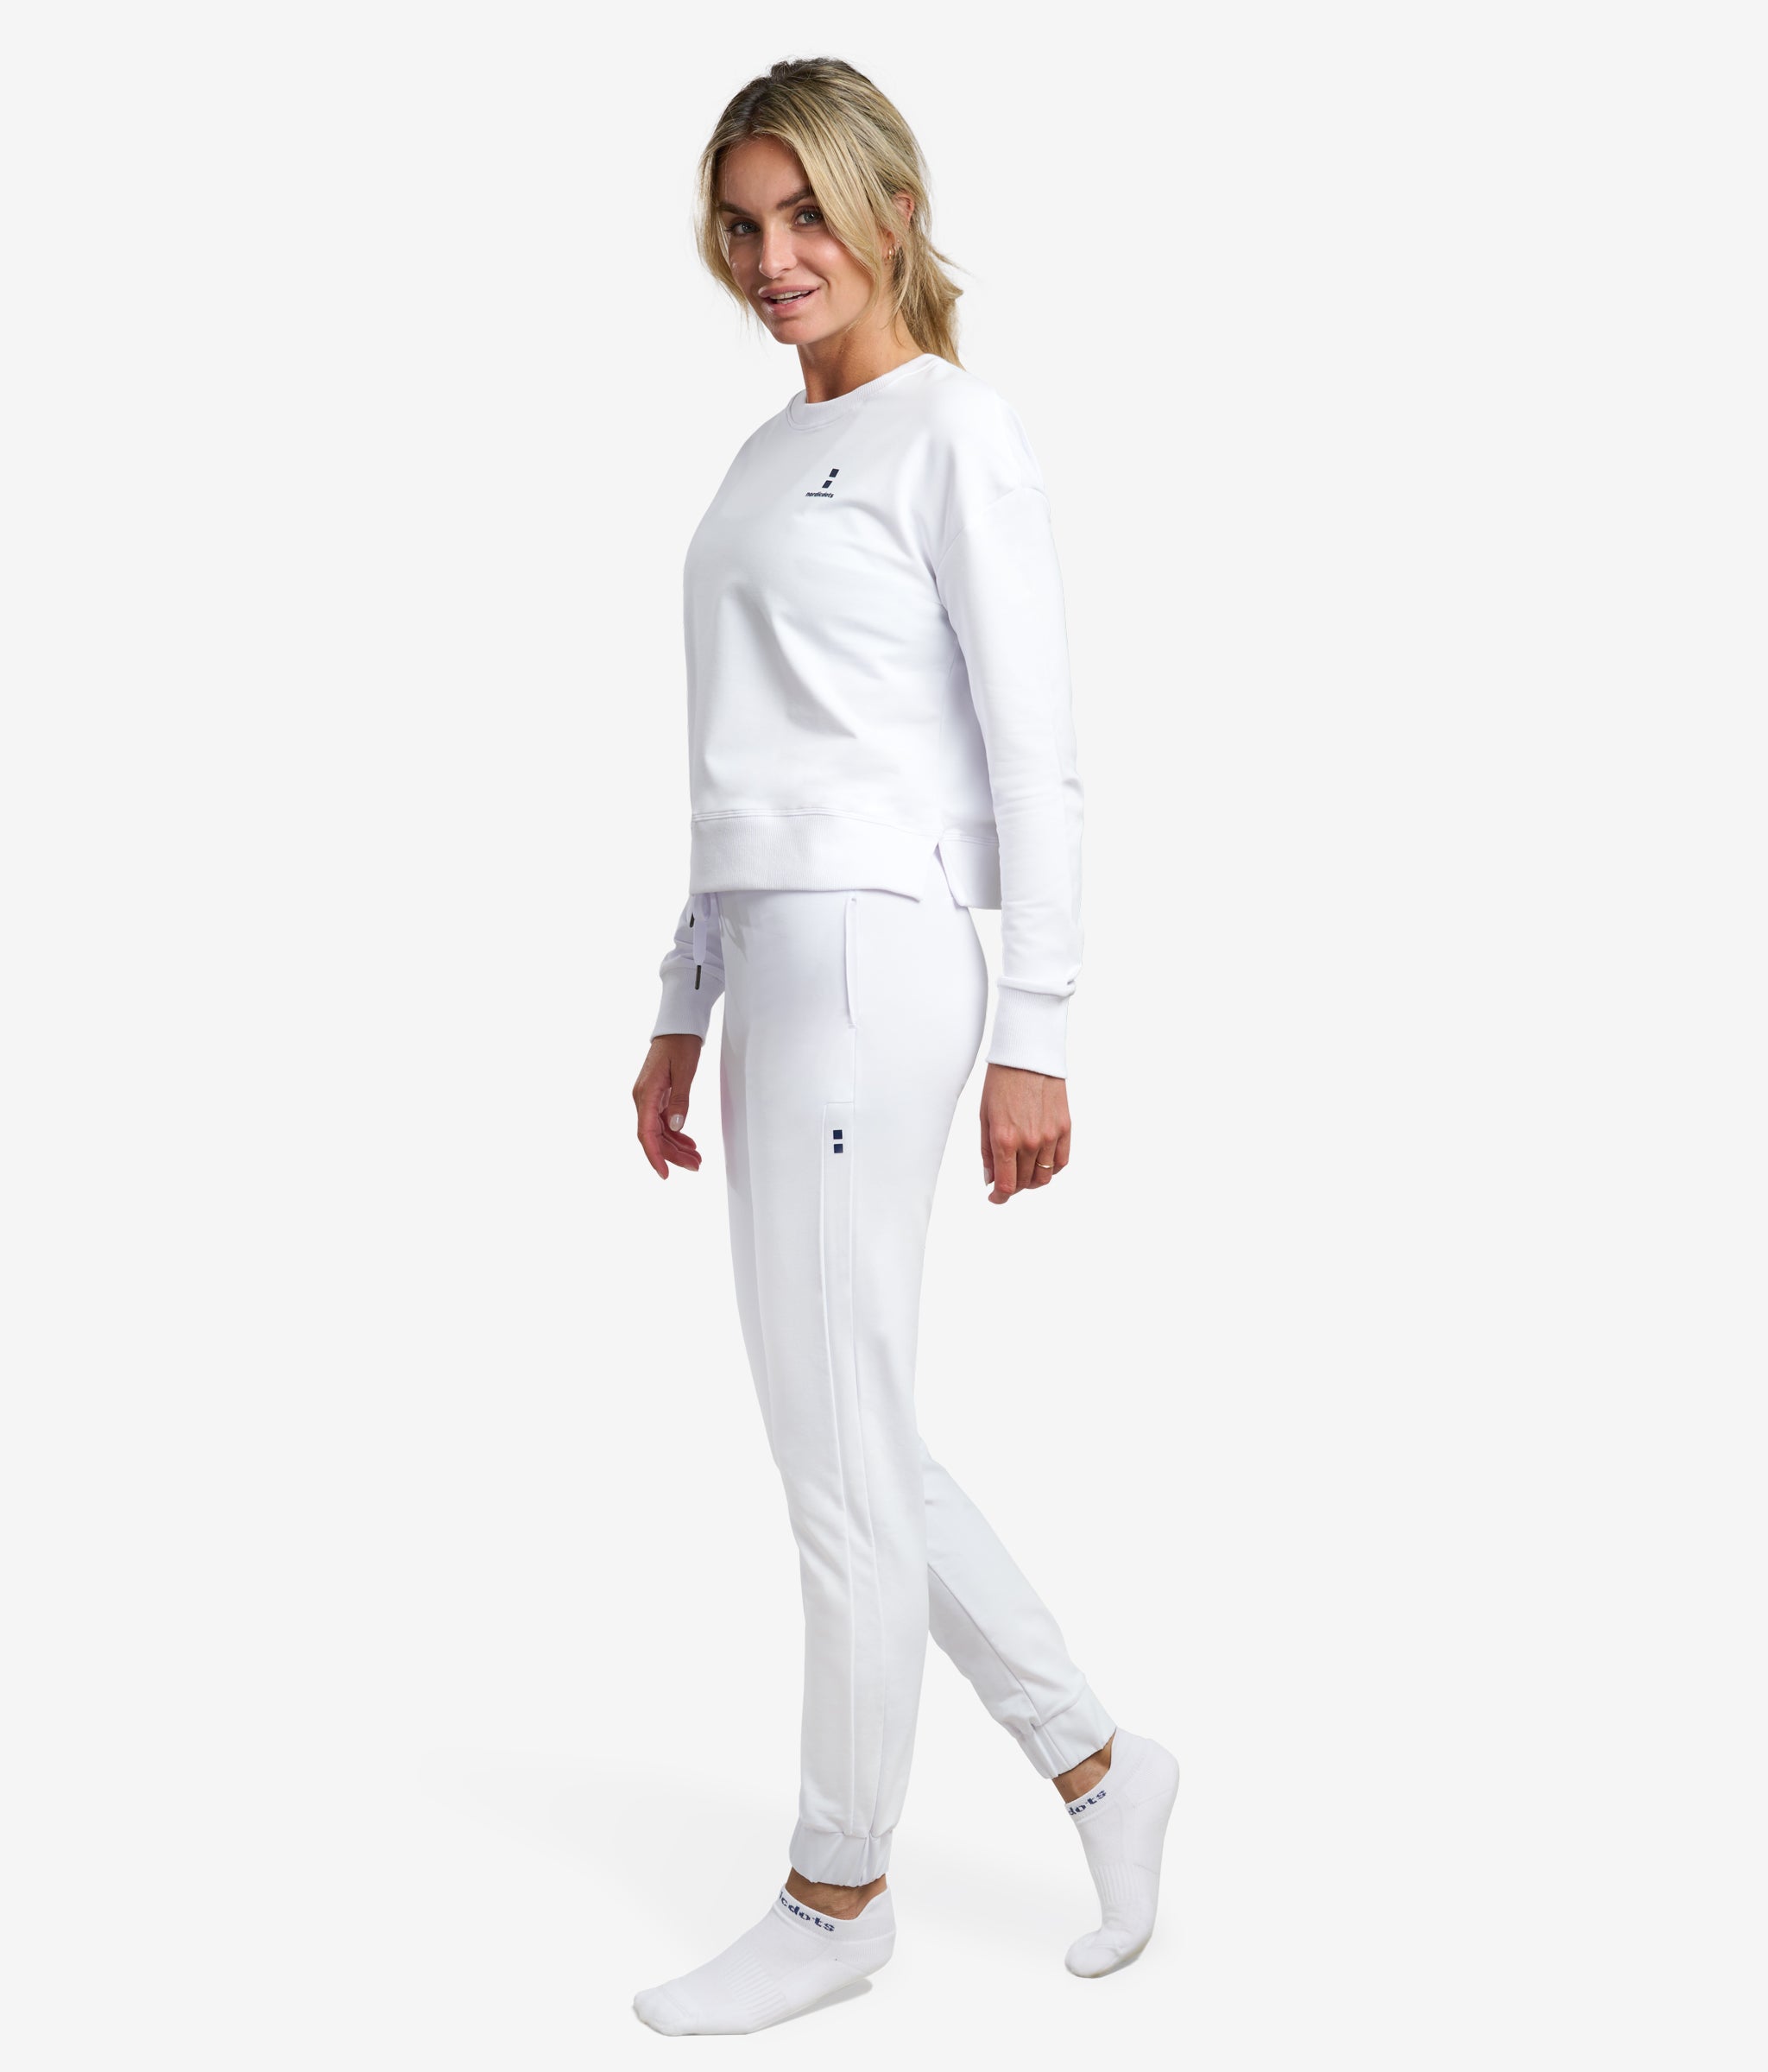 nordicdots white joggers and sweatshirt in white color